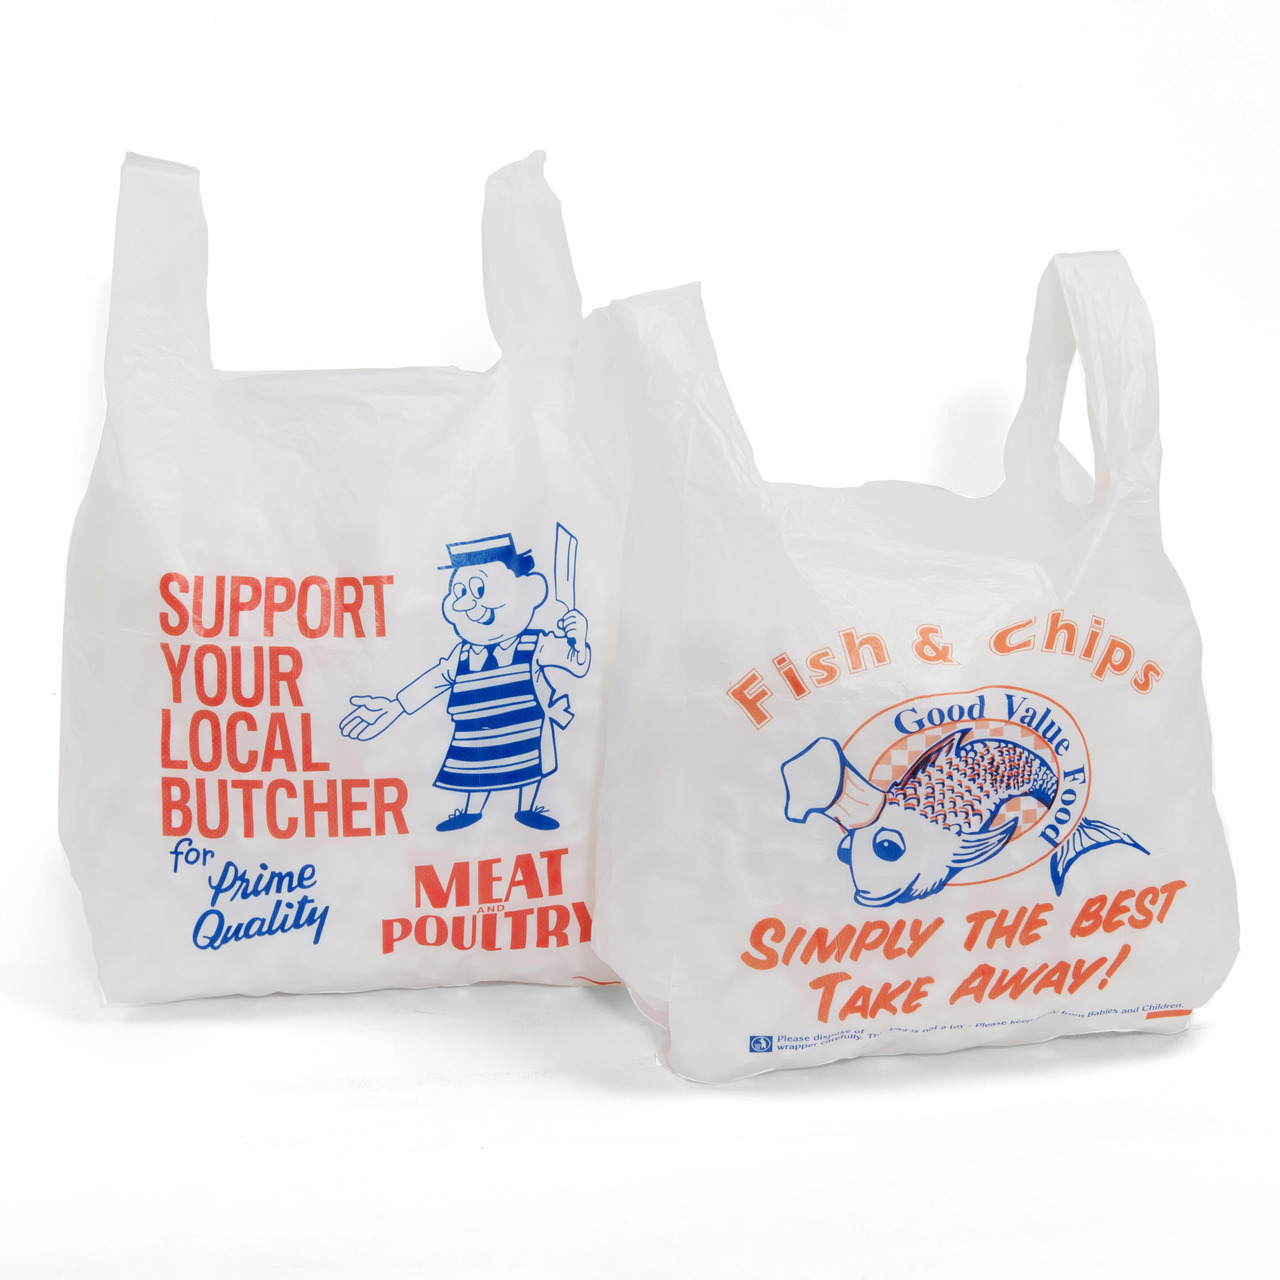 Fish and Chip Vest Carrier Bags - Your one-stop packaging shop